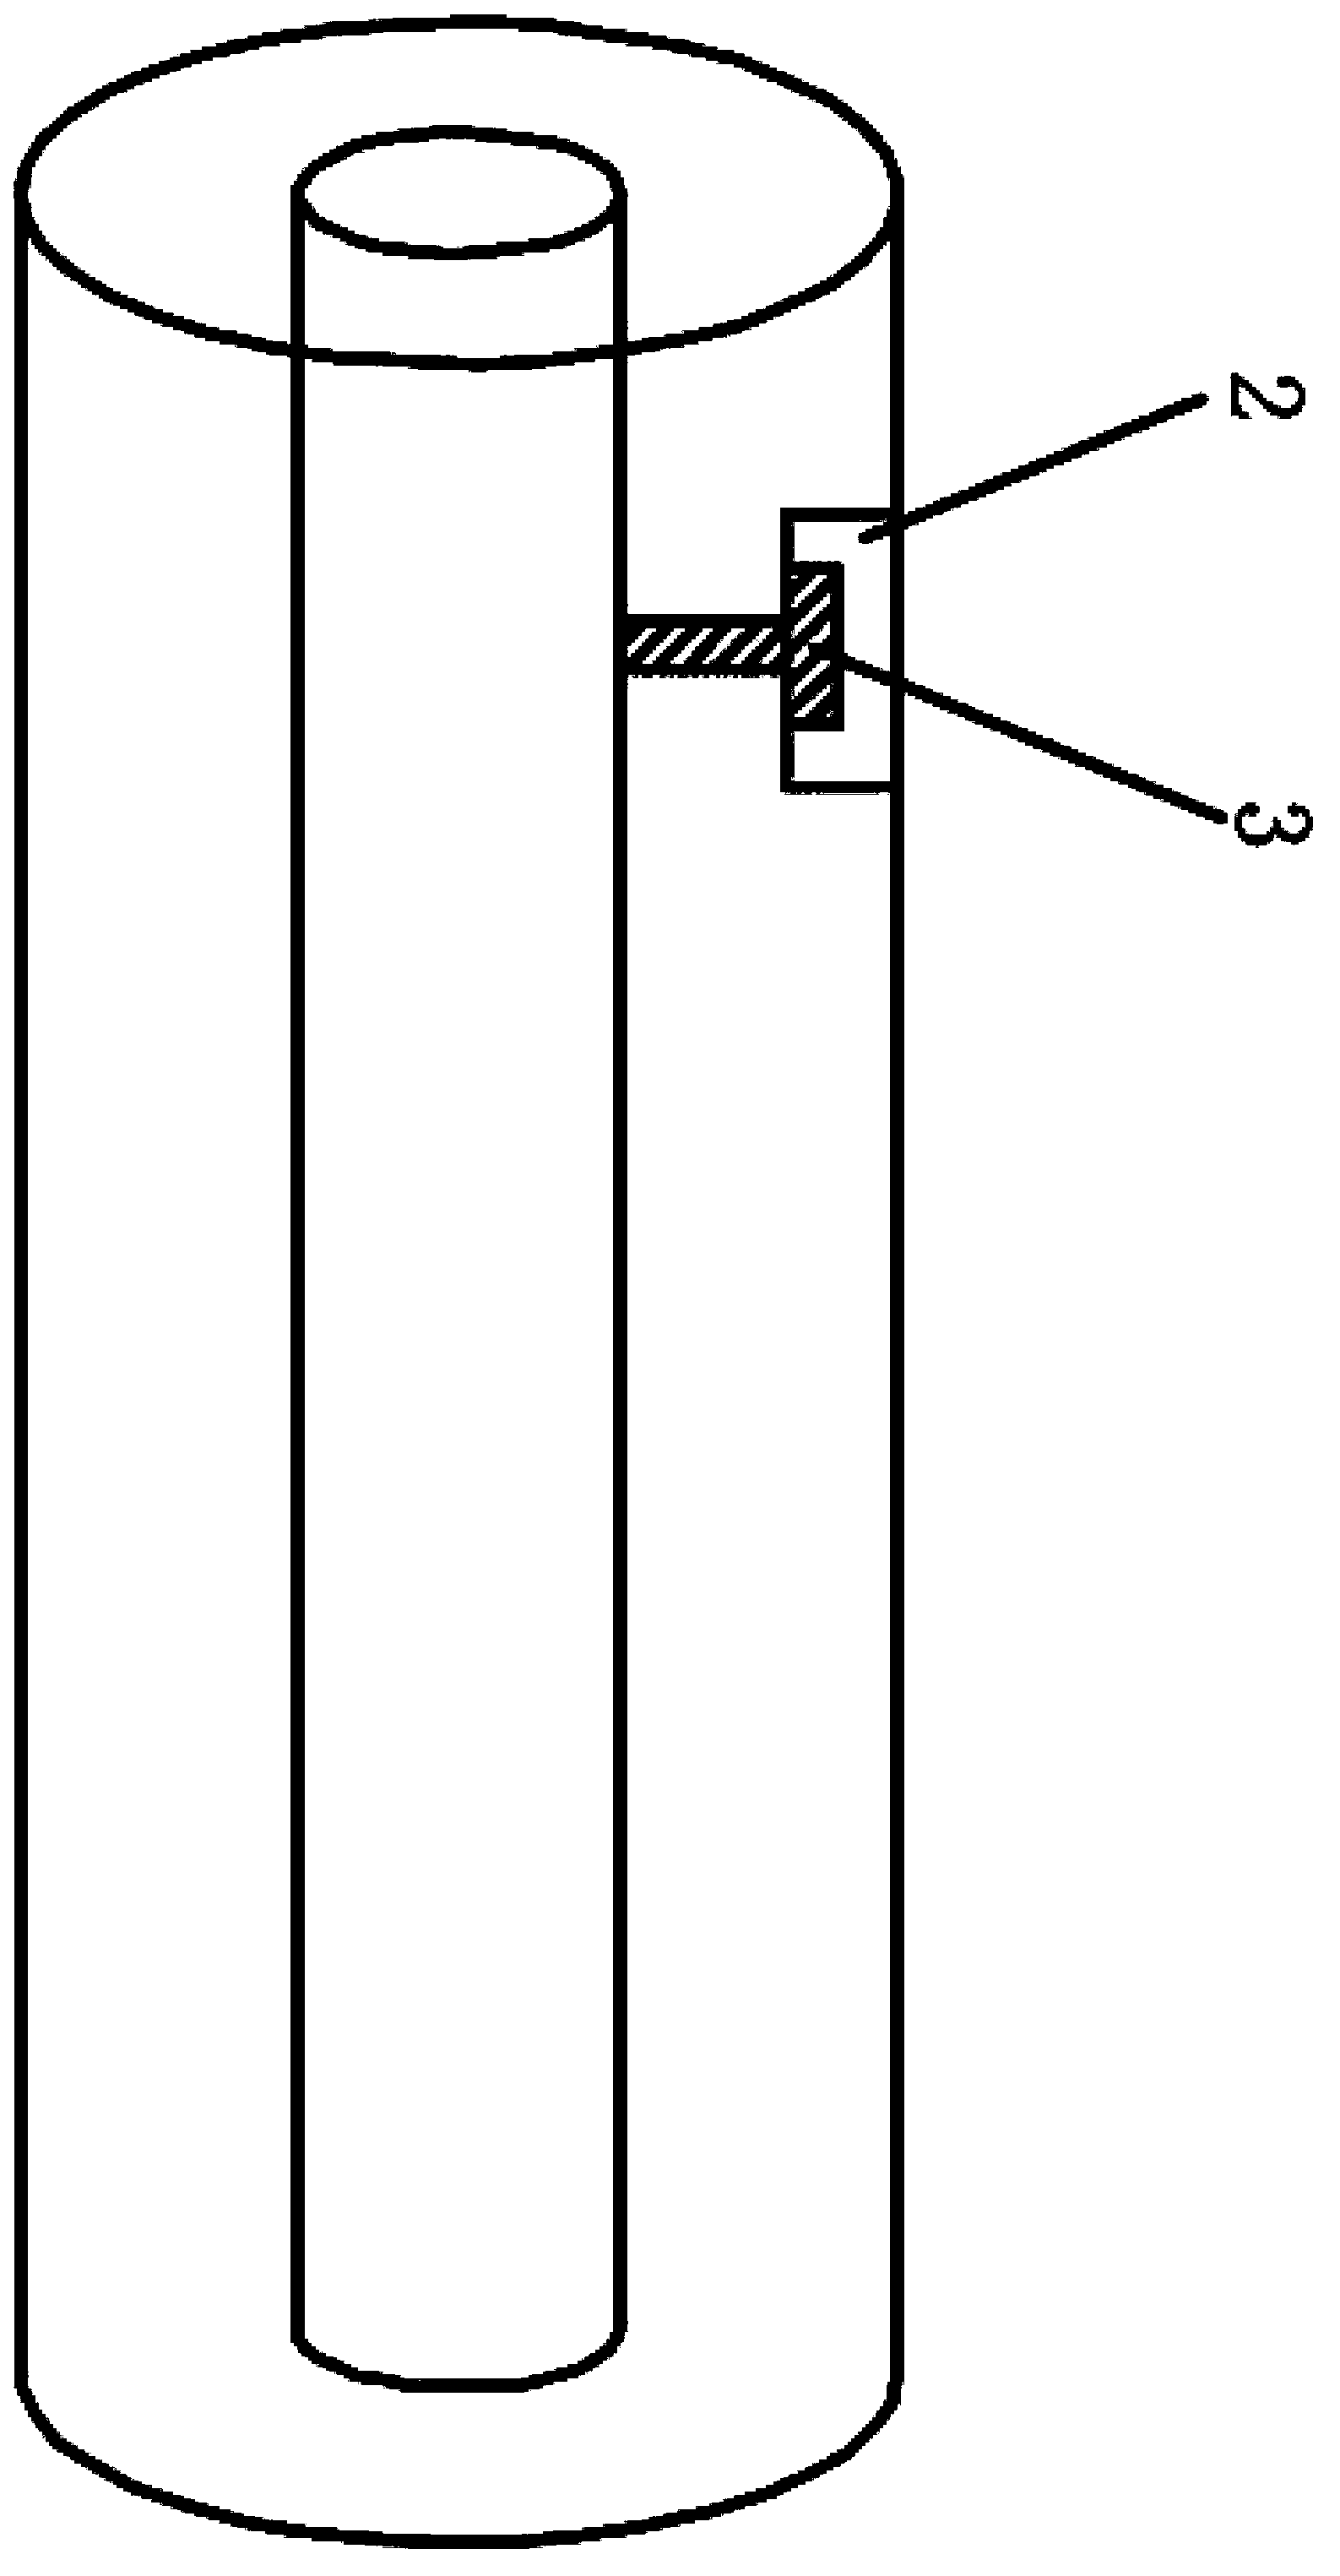 Connecting method of cue